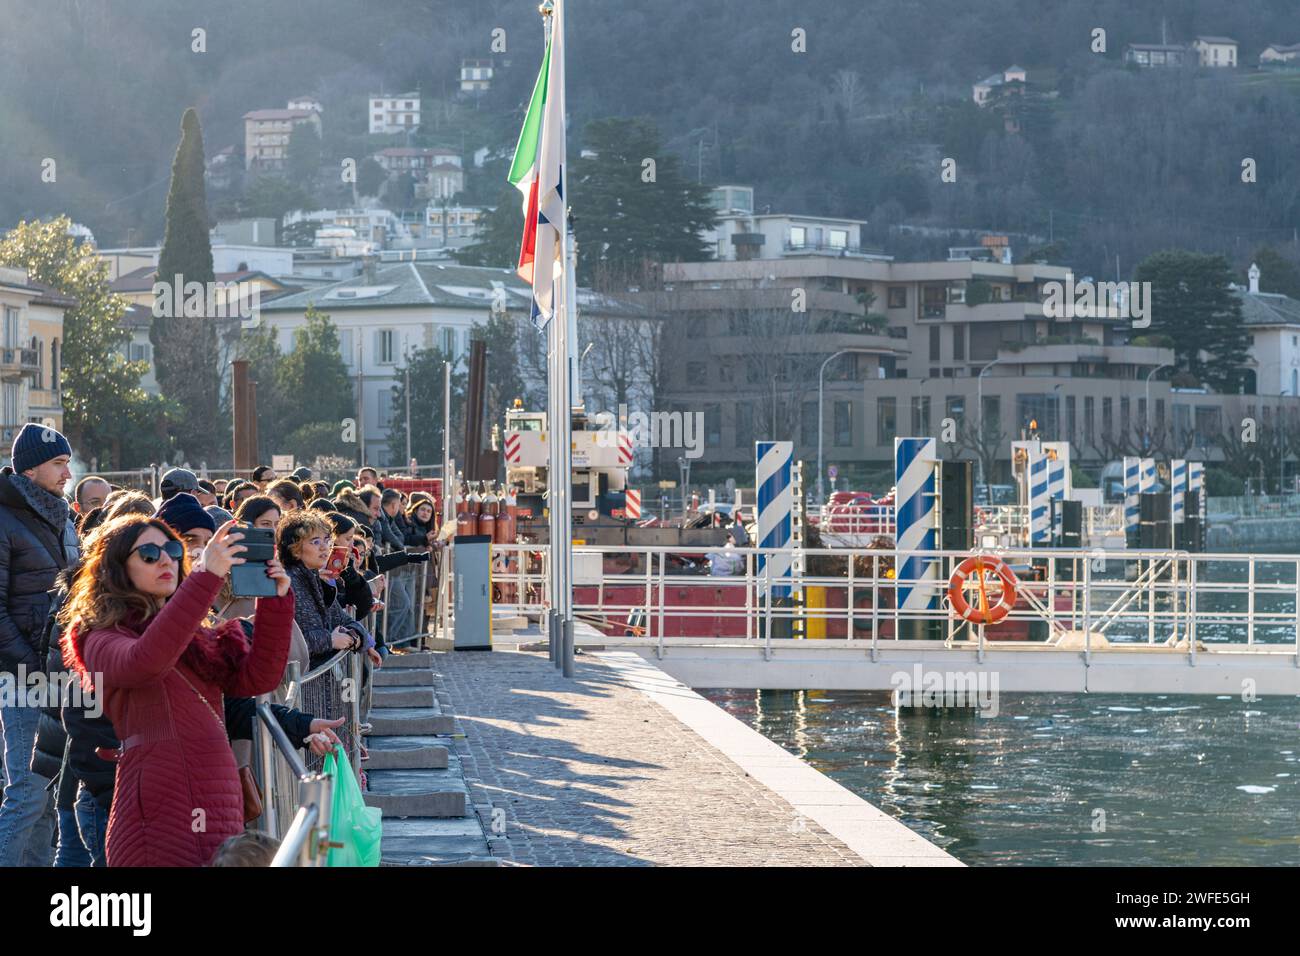 A crowd of people / tourists taking photos and looking at Lake Como in Como, Italy Stock Photo